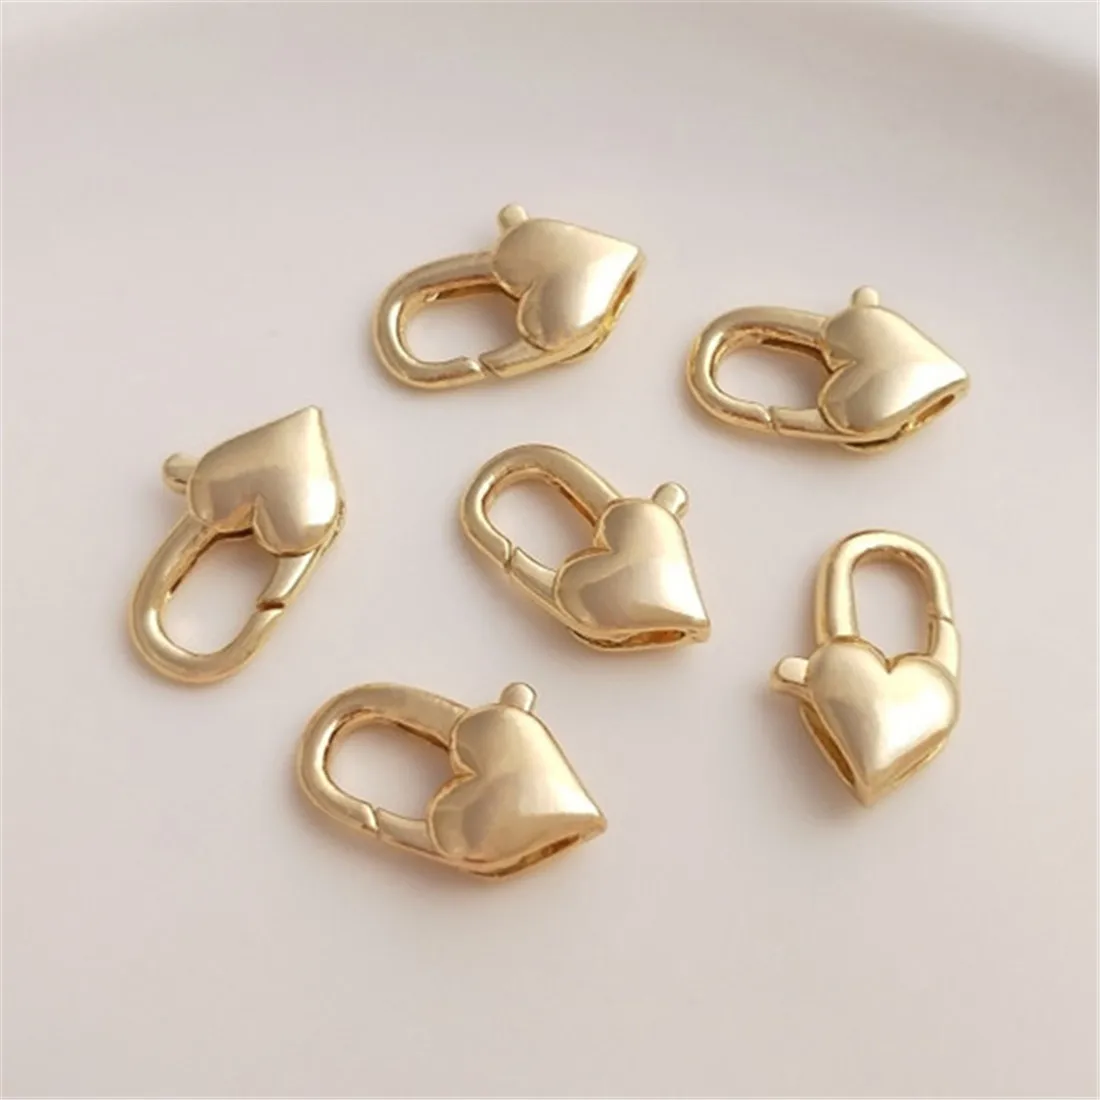 14K Gold Heart-shaped Chain Necklace Clasp Love Lobster Clasp Spring Clasp Diy Handmade Jewelry Accessories B913 10 50pcs 32mm 39mm new rose gold gold silver trigger snap hooks metal swivel clasp lobster claws swivel clip clasp carabines